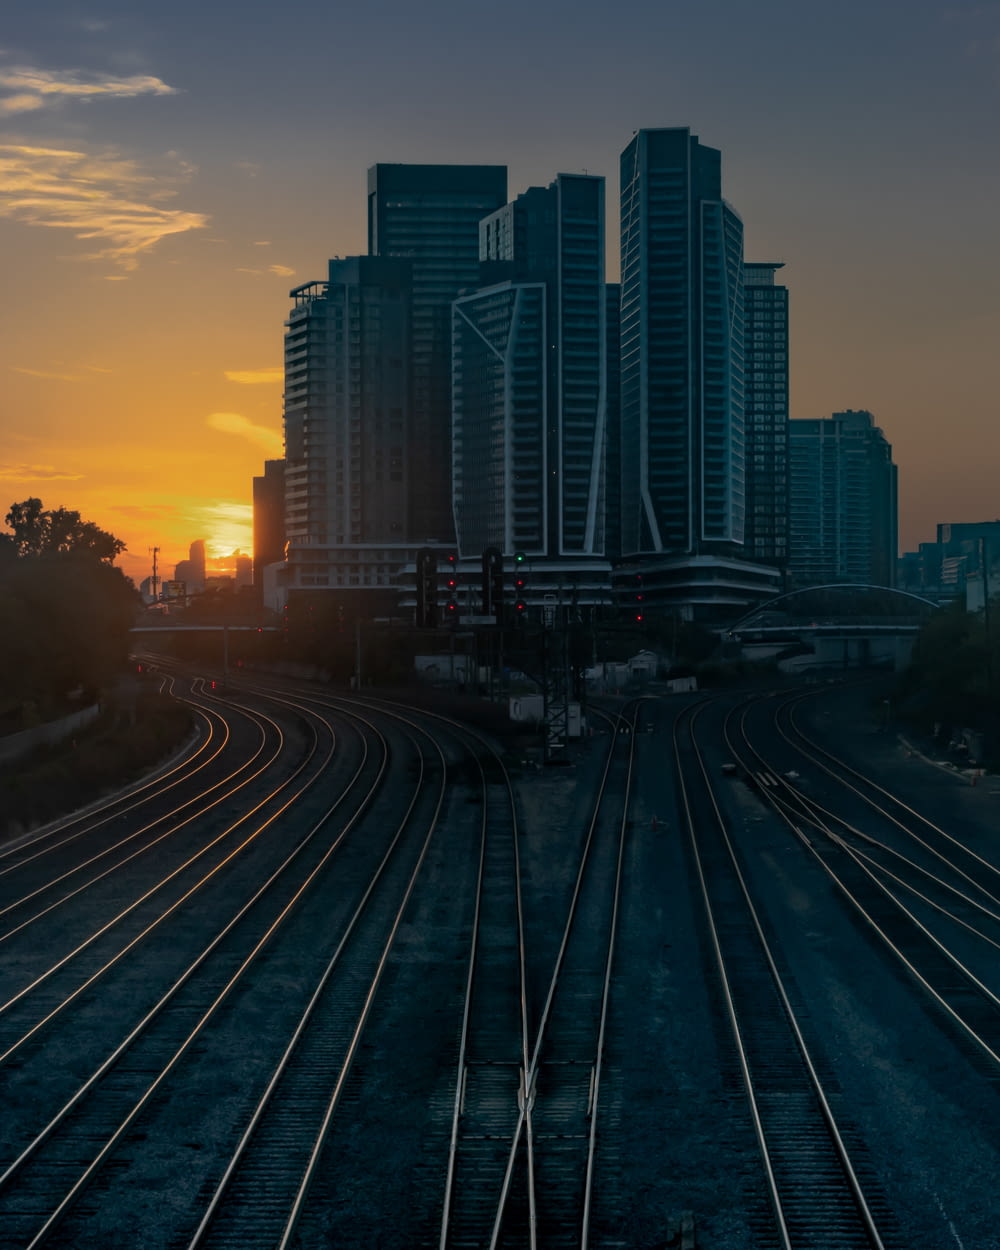 a sunset view of a train track with buildings in the background